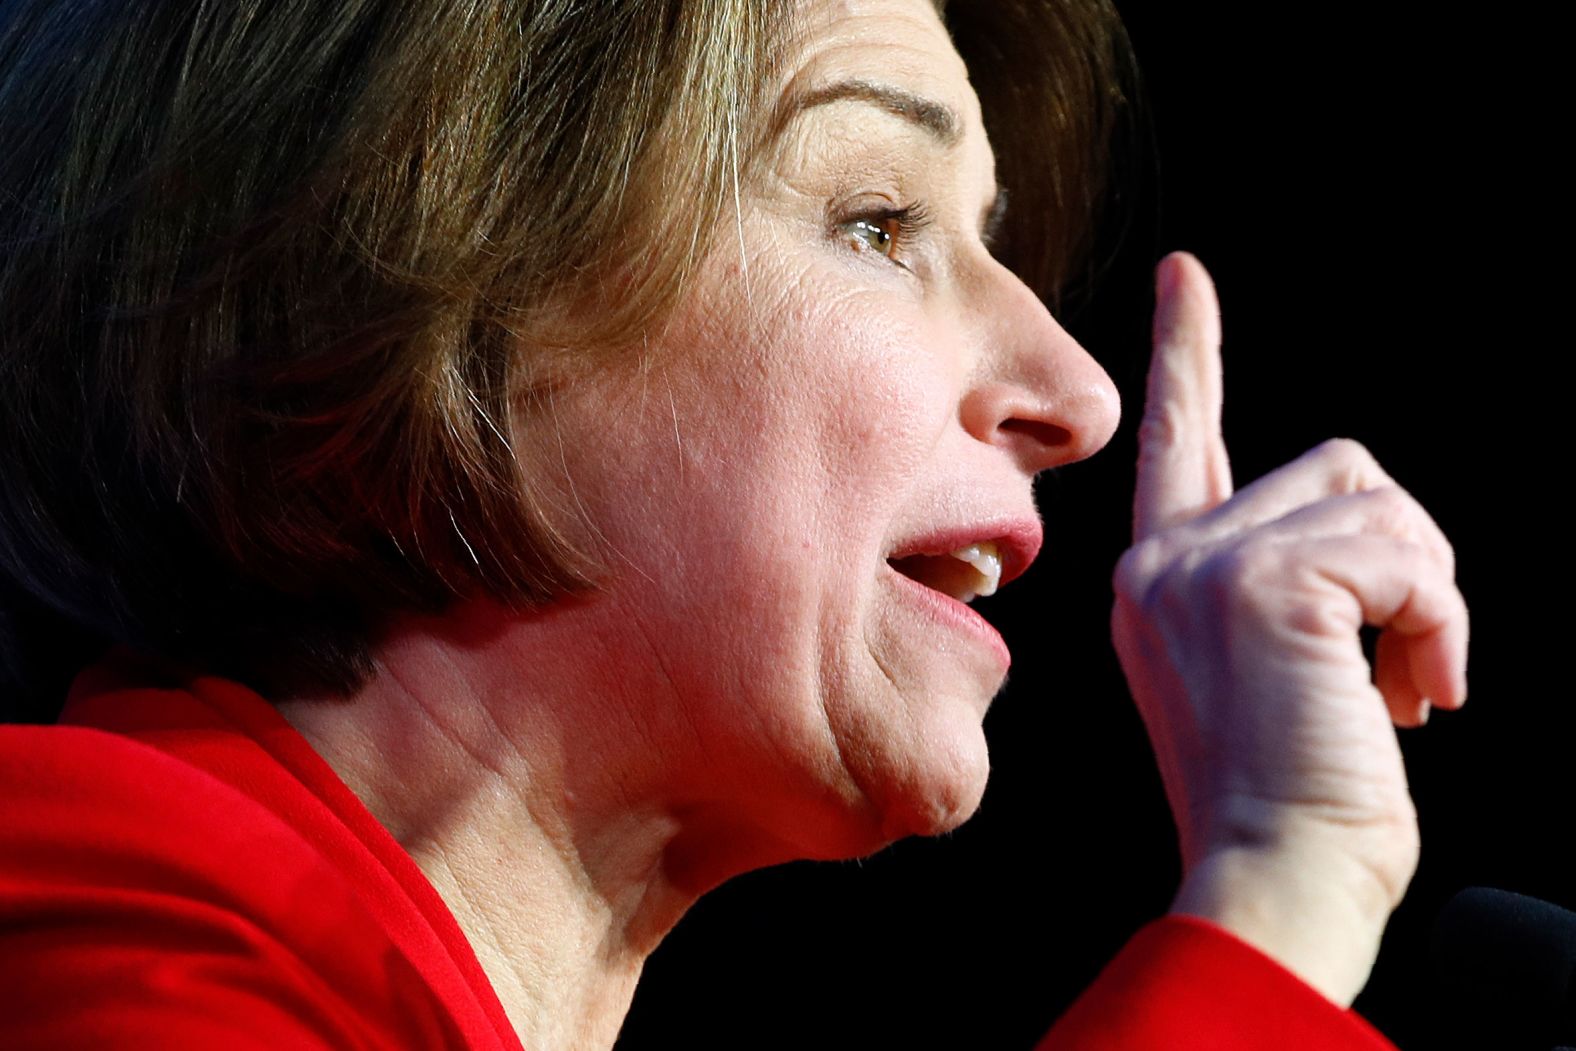 US Sen. Amy Klobuchar speaks in Charlotte, North Carolina, on Saturday, a couple of days before <a href="index.php?page=&url=https%3A%2F%2Fwww.cnn.com%2F2020%2F03%2F02%2Fpolitics%2Famy-klobuchar-ends-2020-campaign%2Findex.html" target="_blank">dropping out of the race.</a>